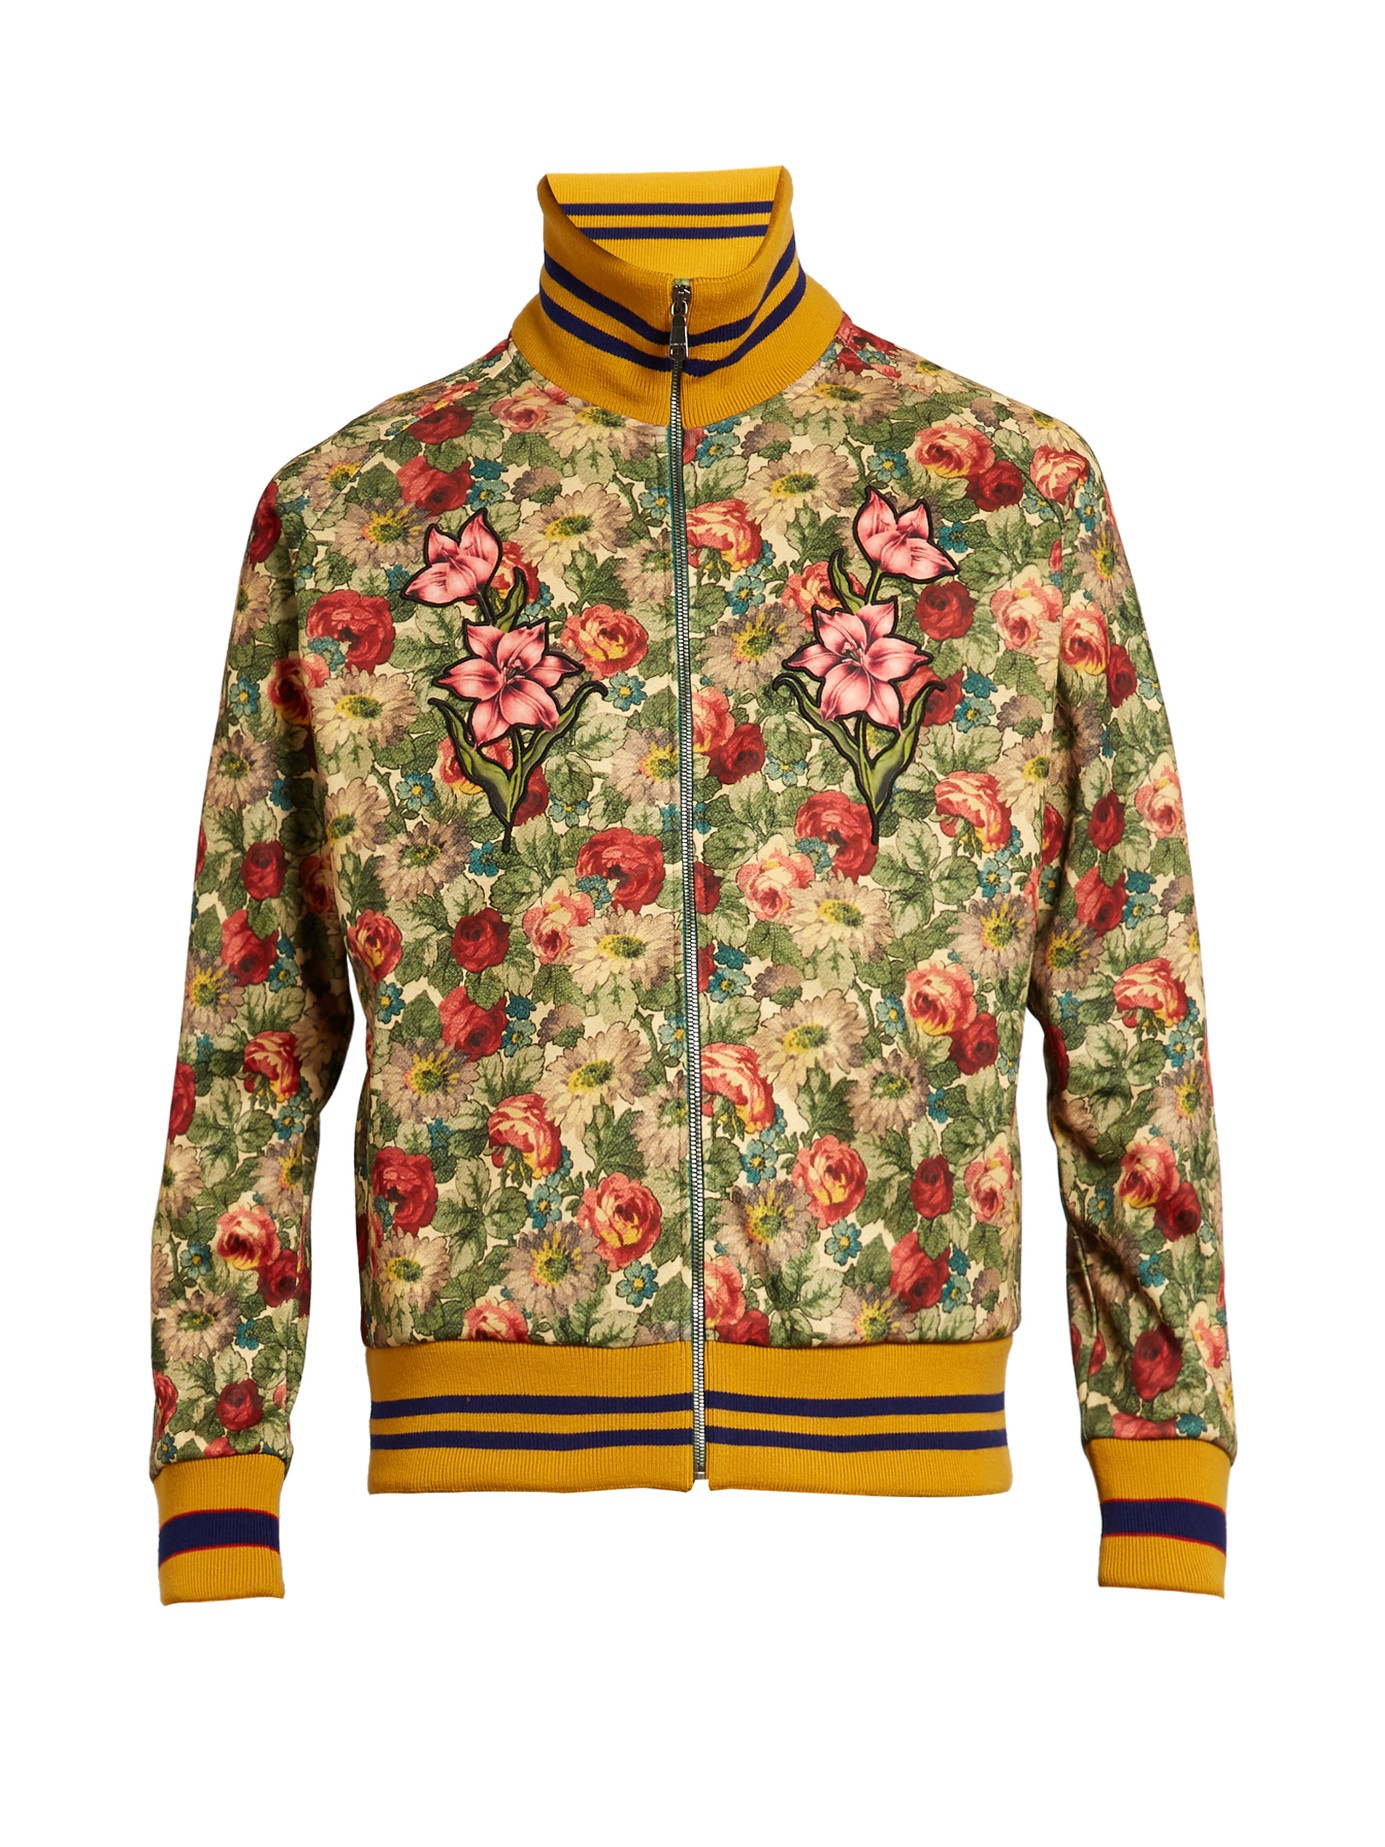 Gucci Floral Print Zip Jacket in Blue for Men - Lyst